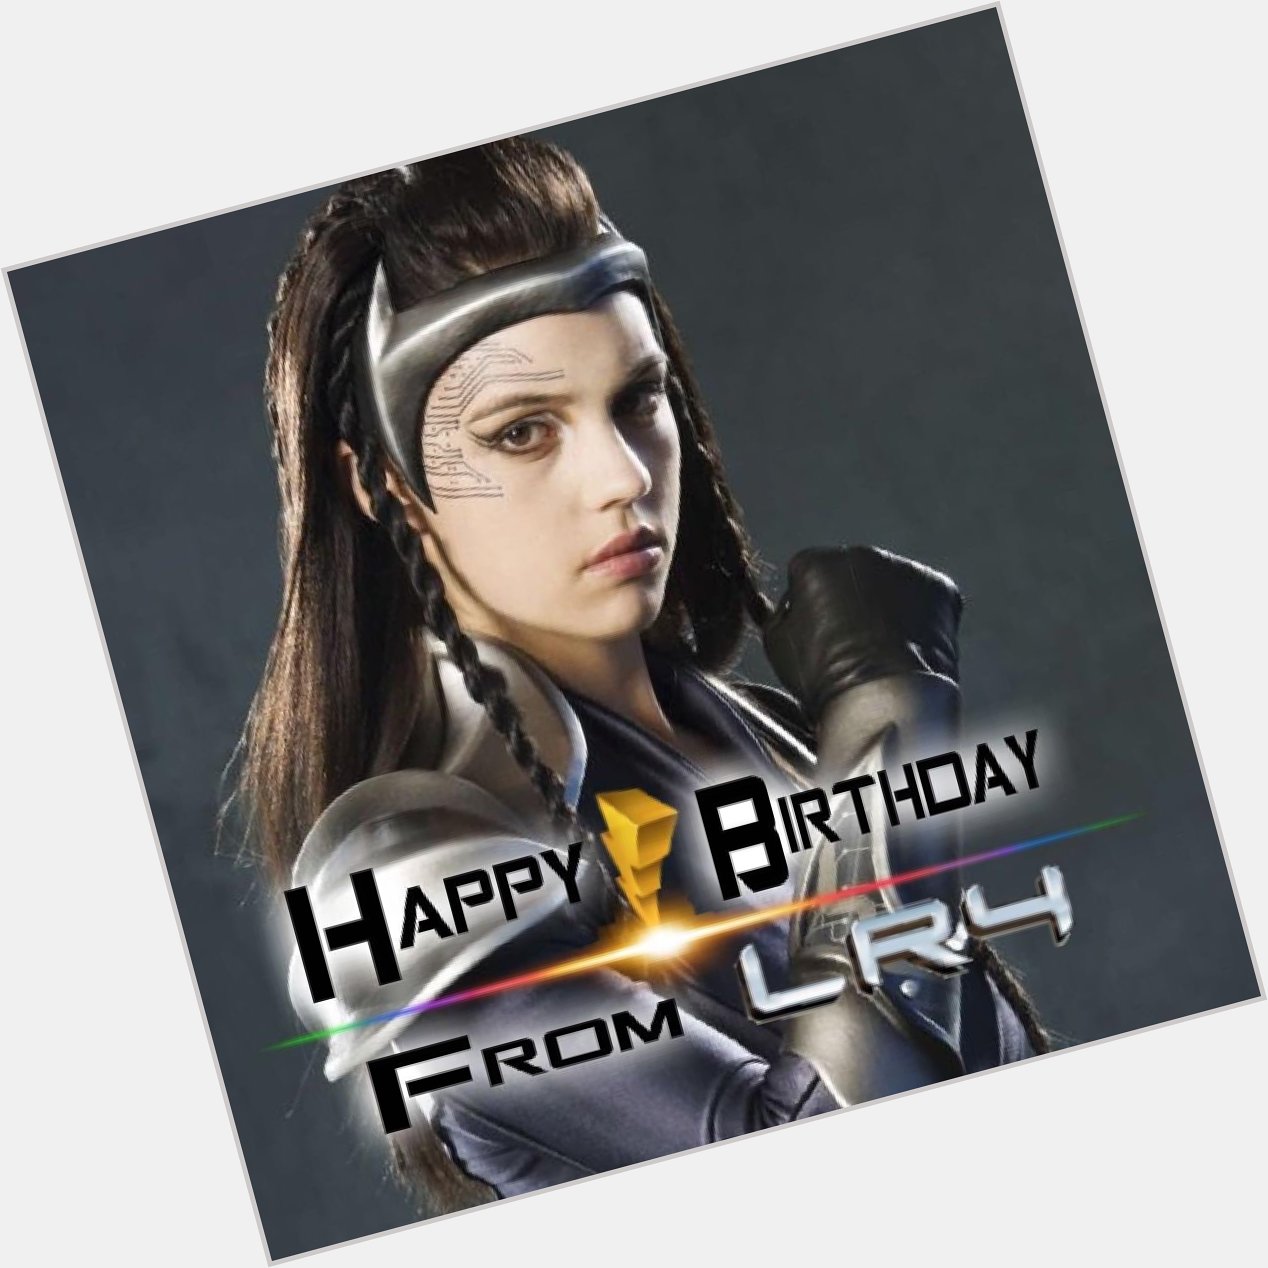 LR4 would like to wish Adelaide Kane a Happy Birthday! 